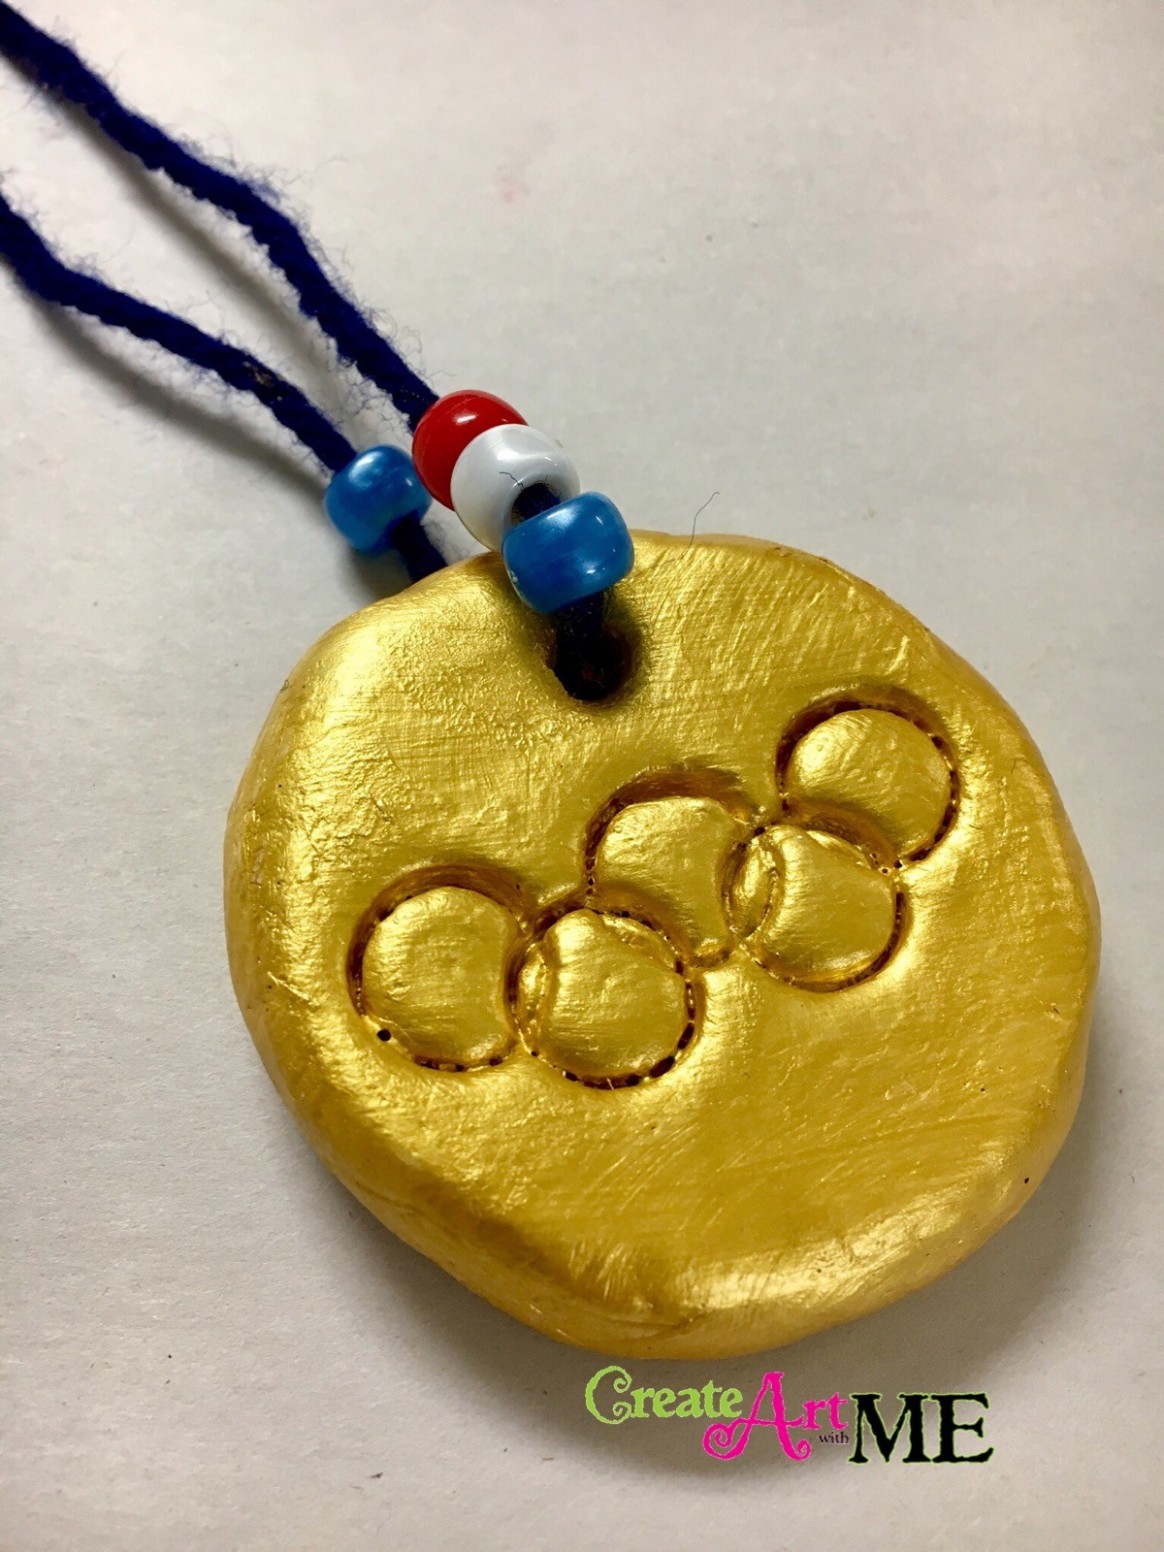 Olympic Medal Craft Air Dry Clay Create Art With Me Air Dry Clay Painting Techniques